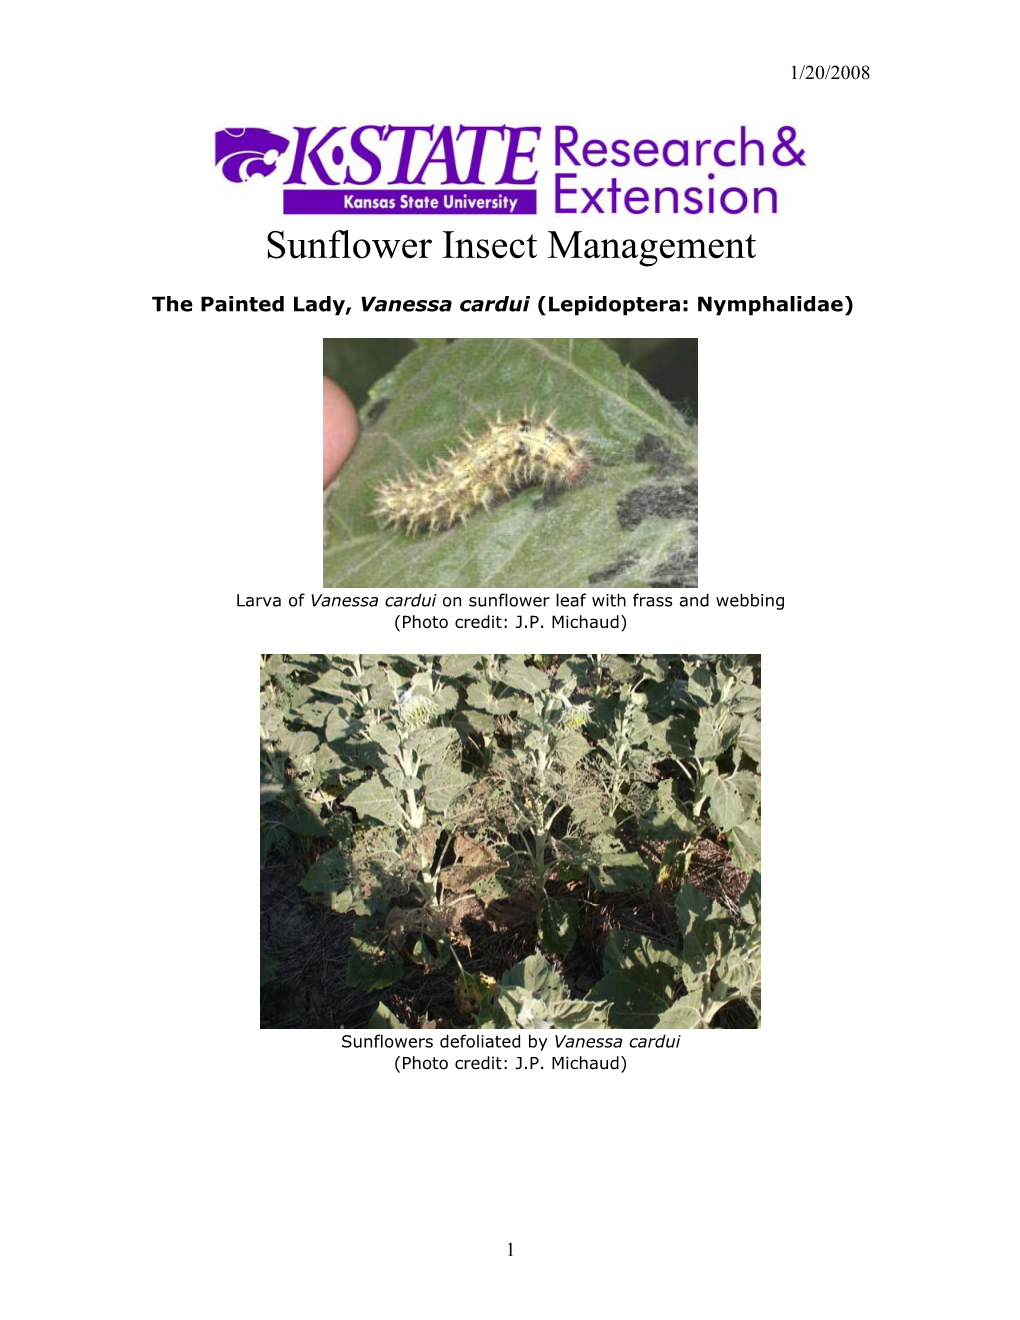 Sunflower Insect Management